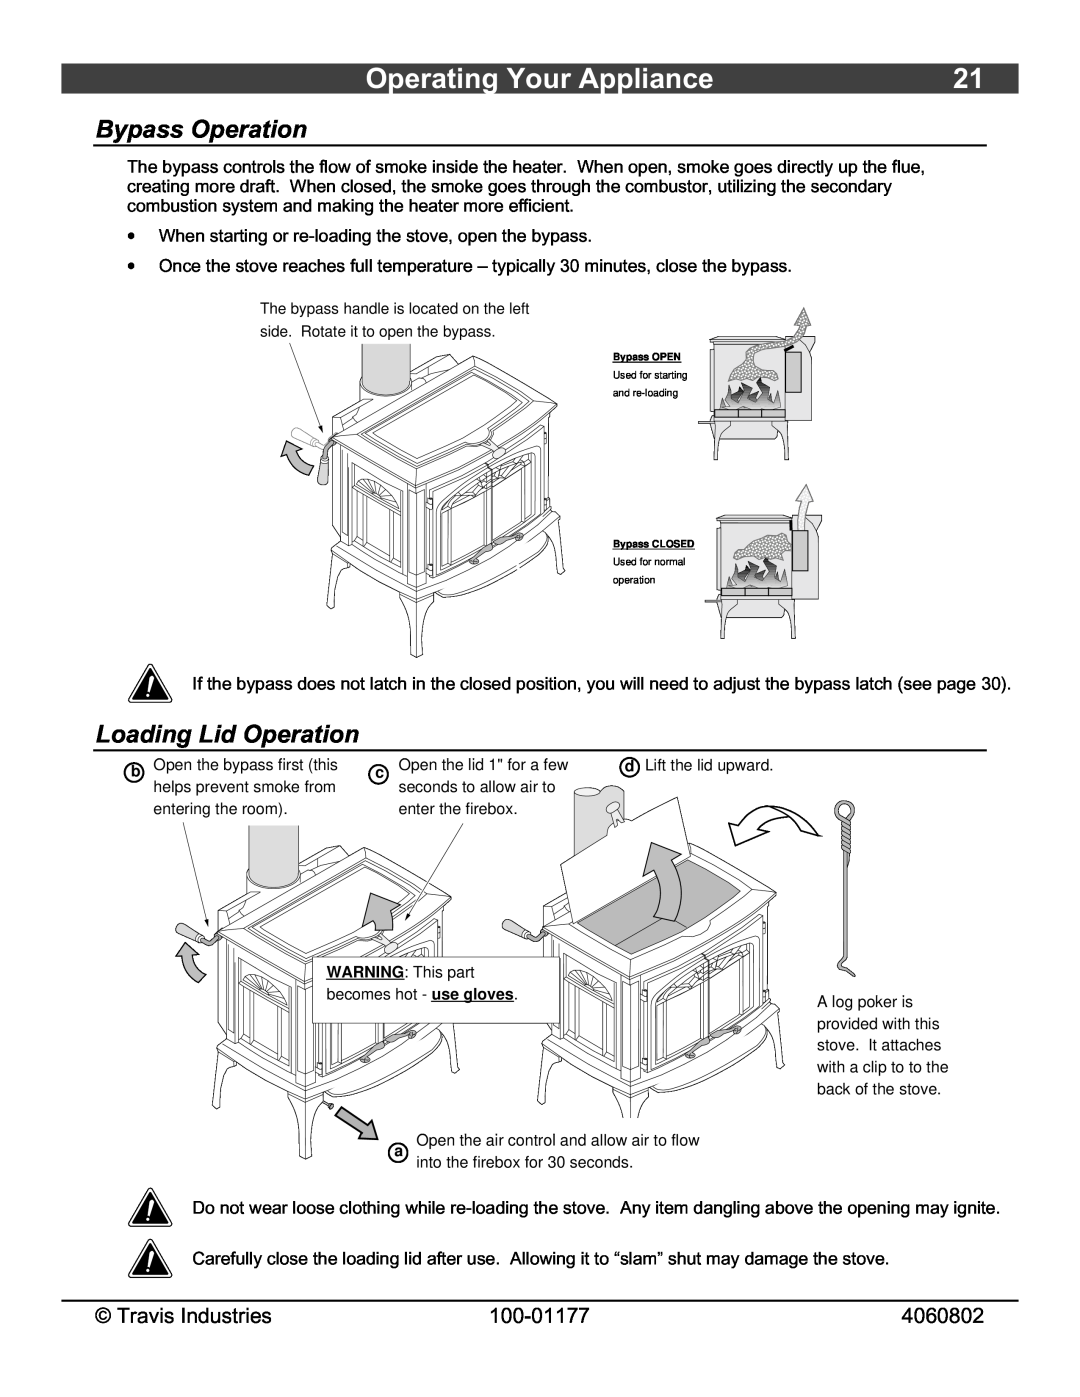 Lopi Leyden Wood Stove owner manual Operating Your Appliance, Bypass Operation, Loading Lid Operation 